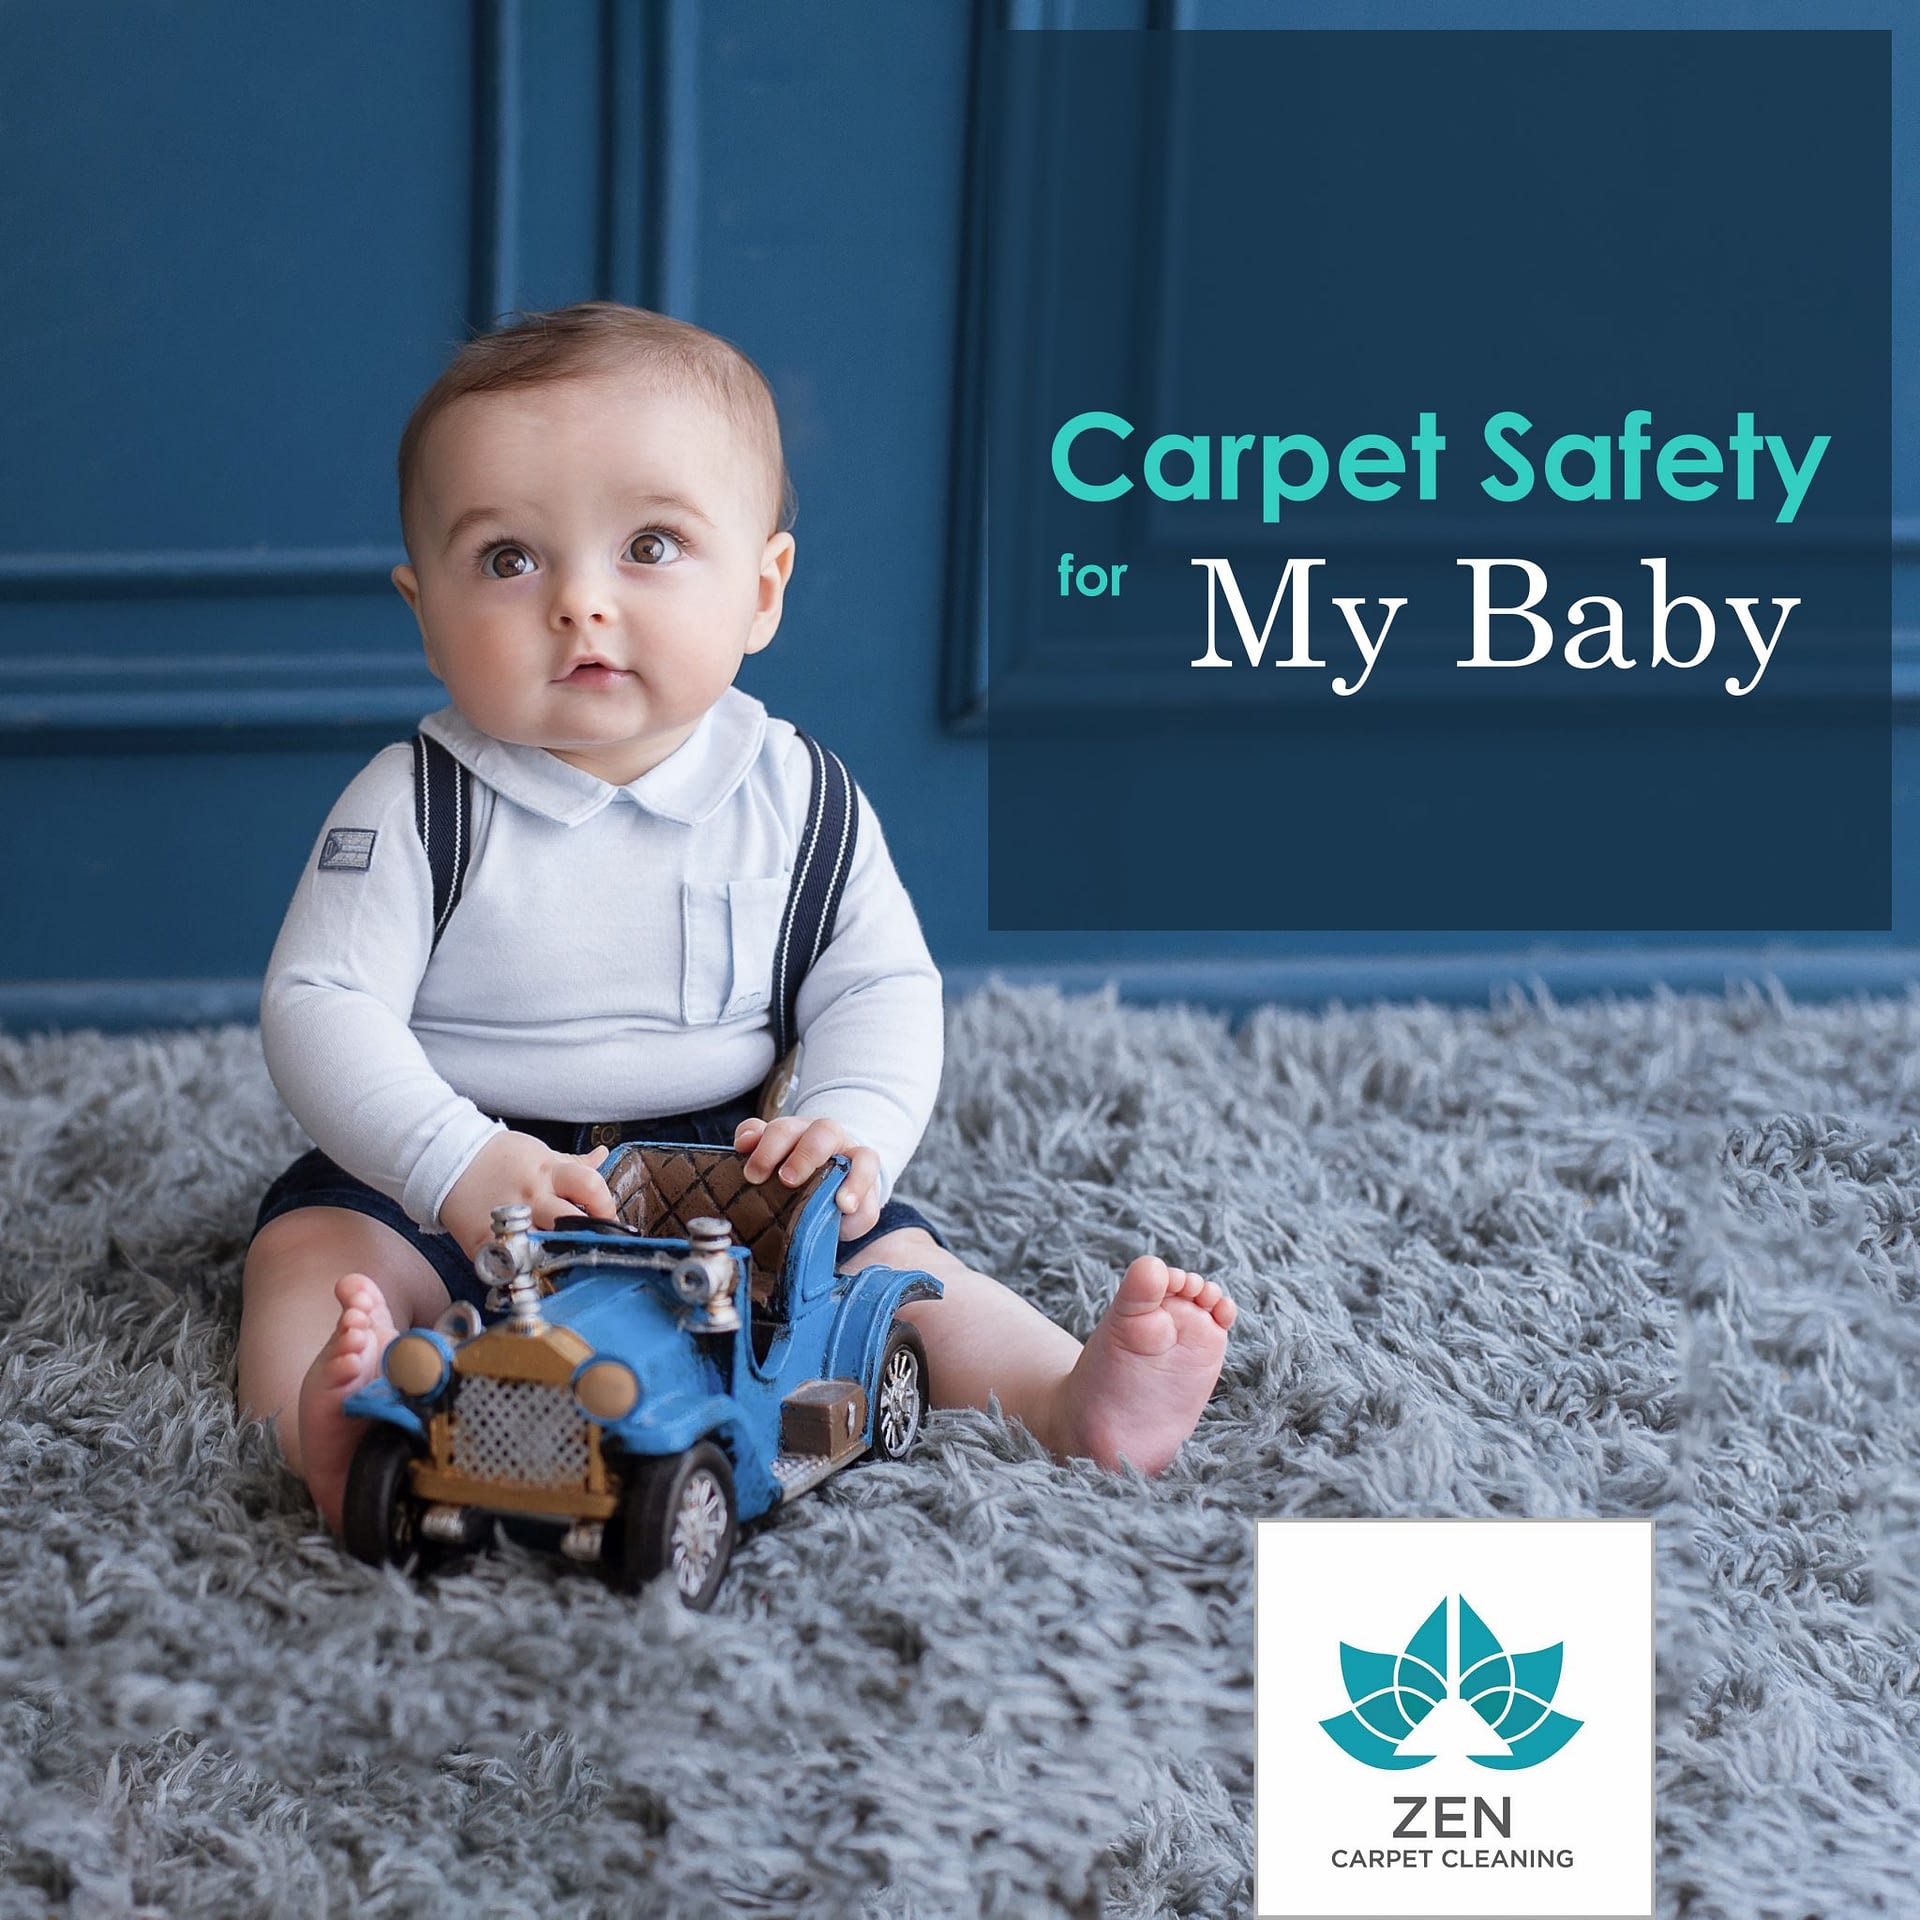 How Can I Clean The Carpet Safely for My Baby? Zen Carpet Cleaning